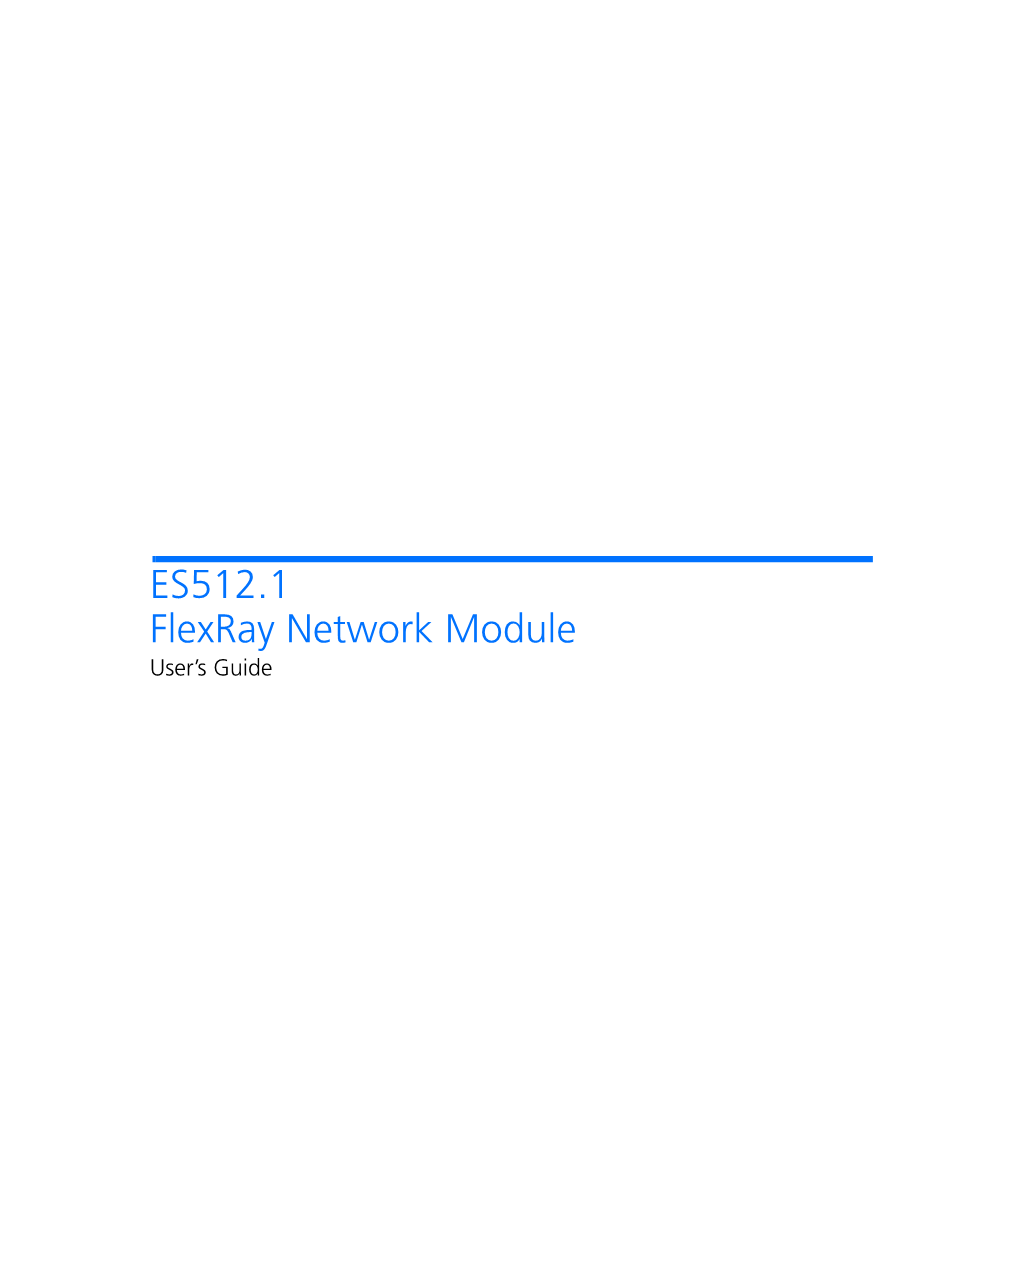 ES512.1 Flexray Network Module User's Guide